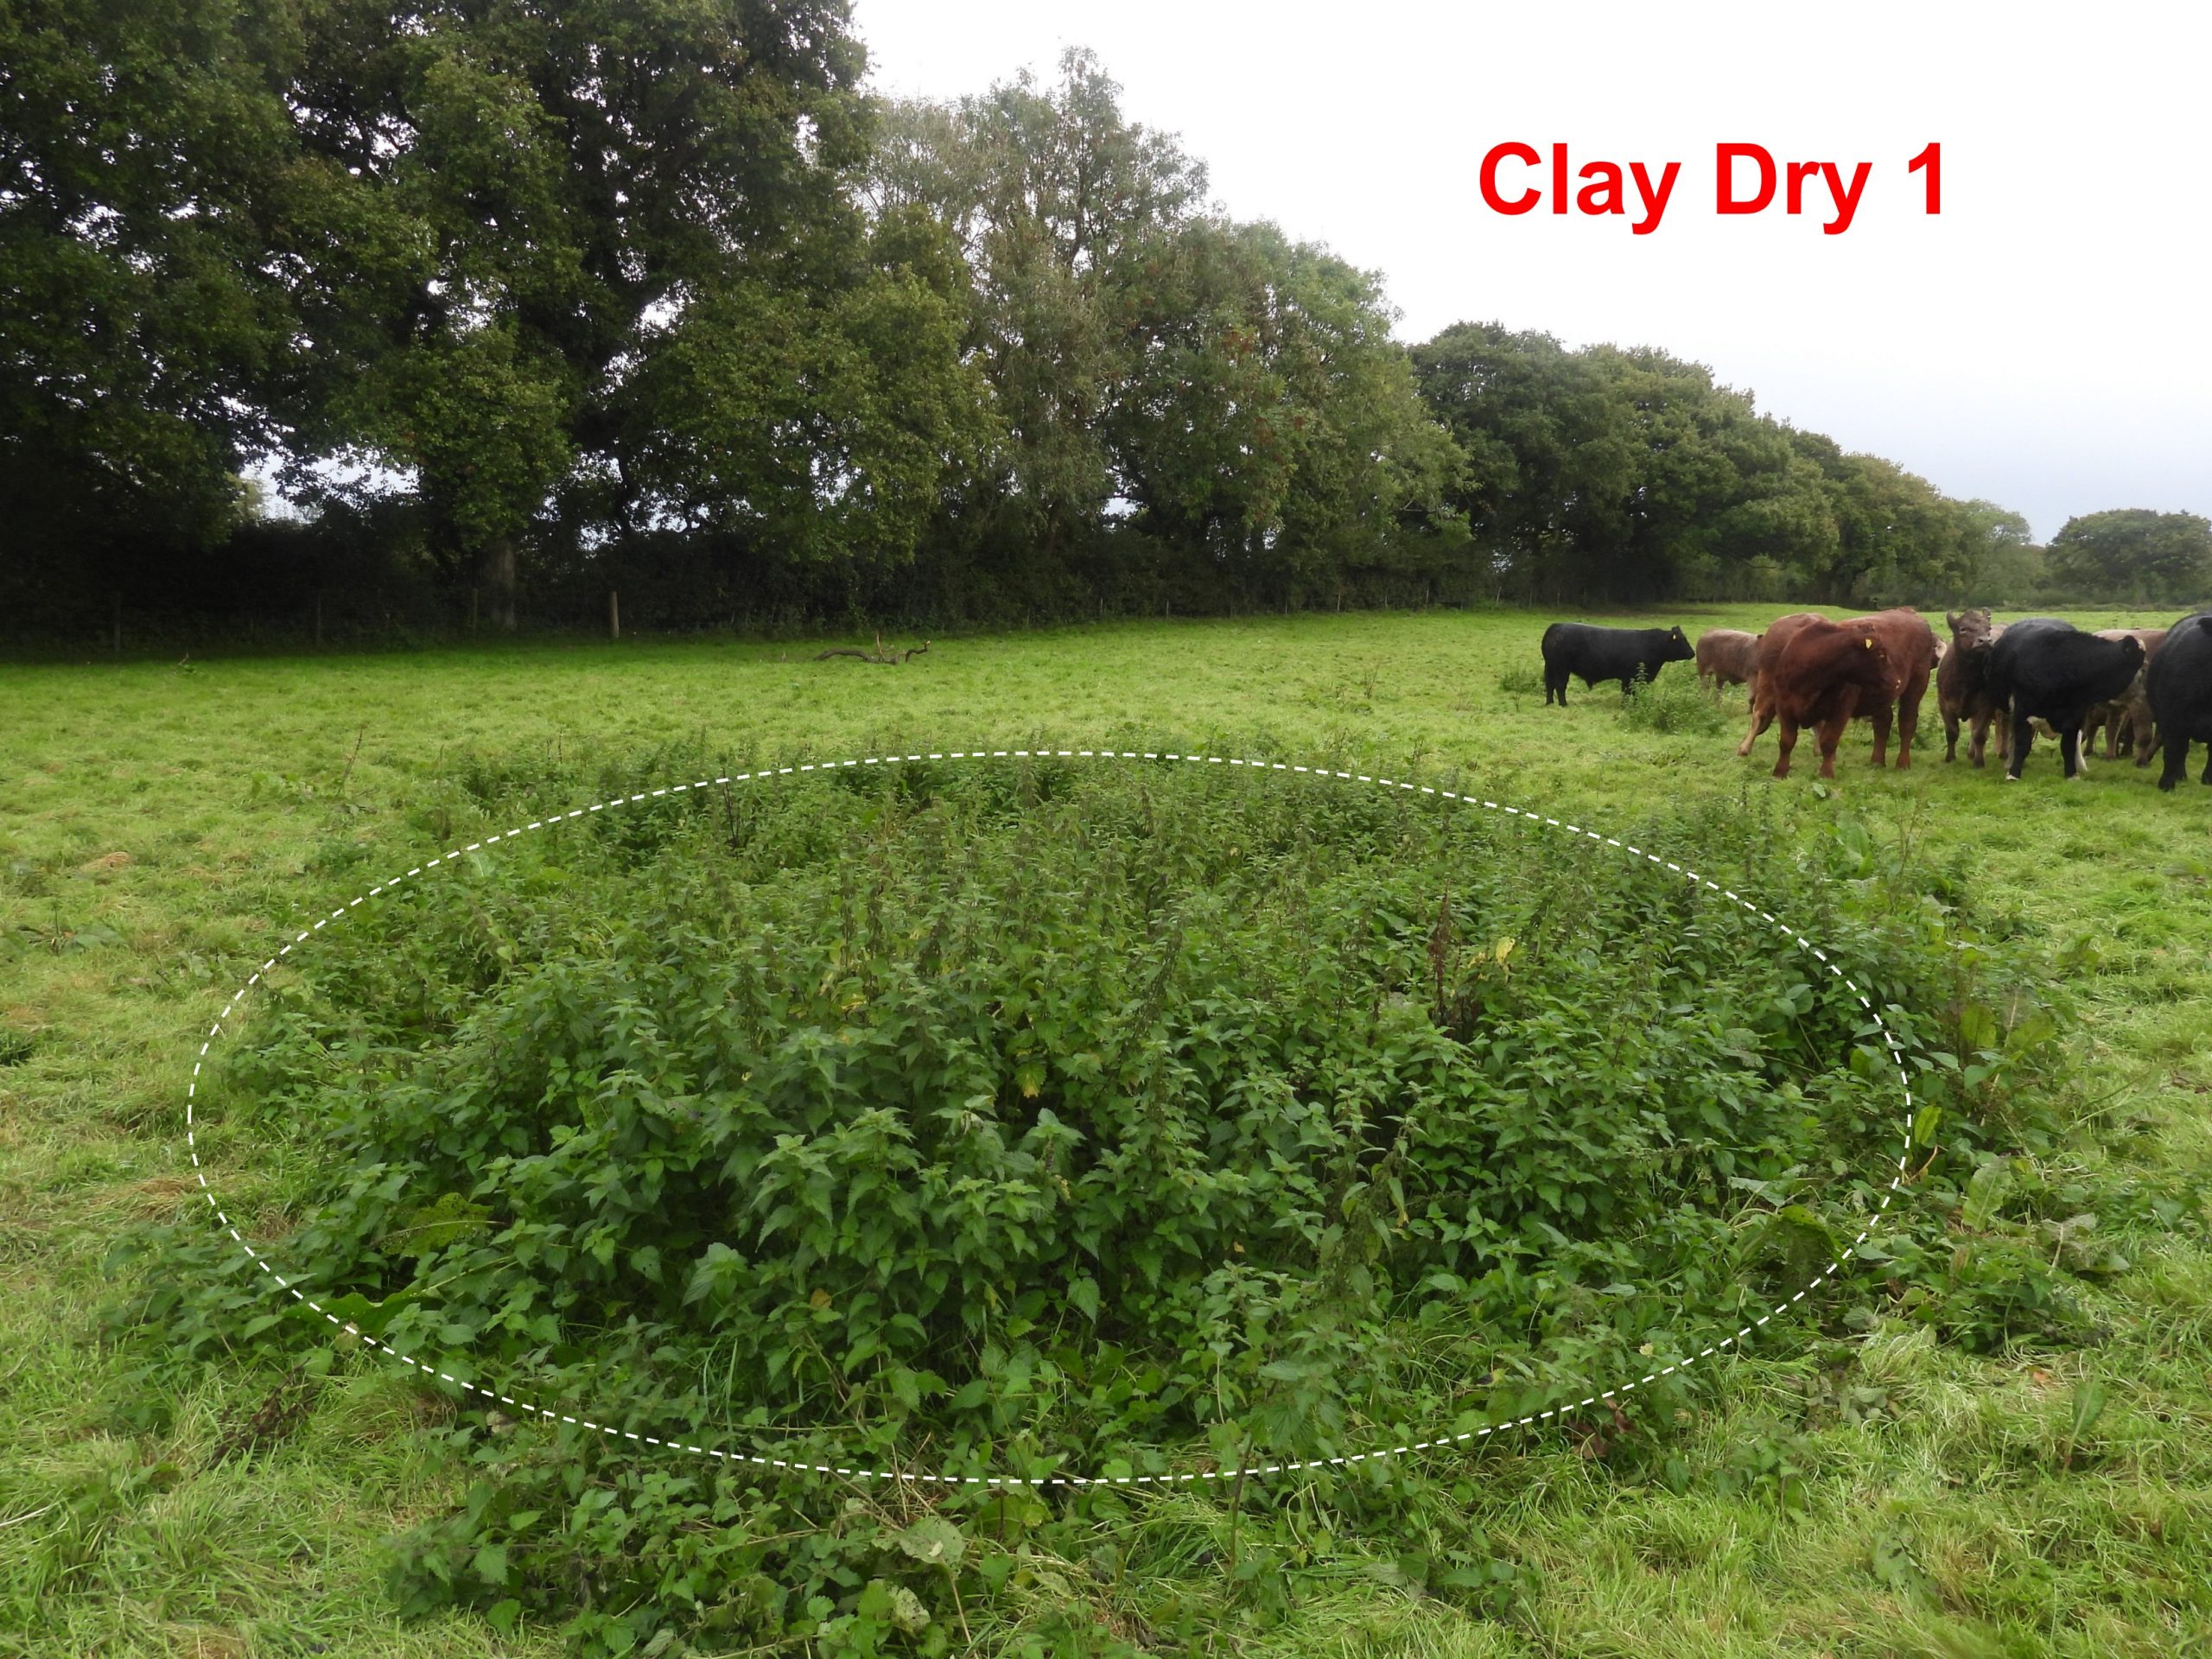 2. Clay Dry 1a